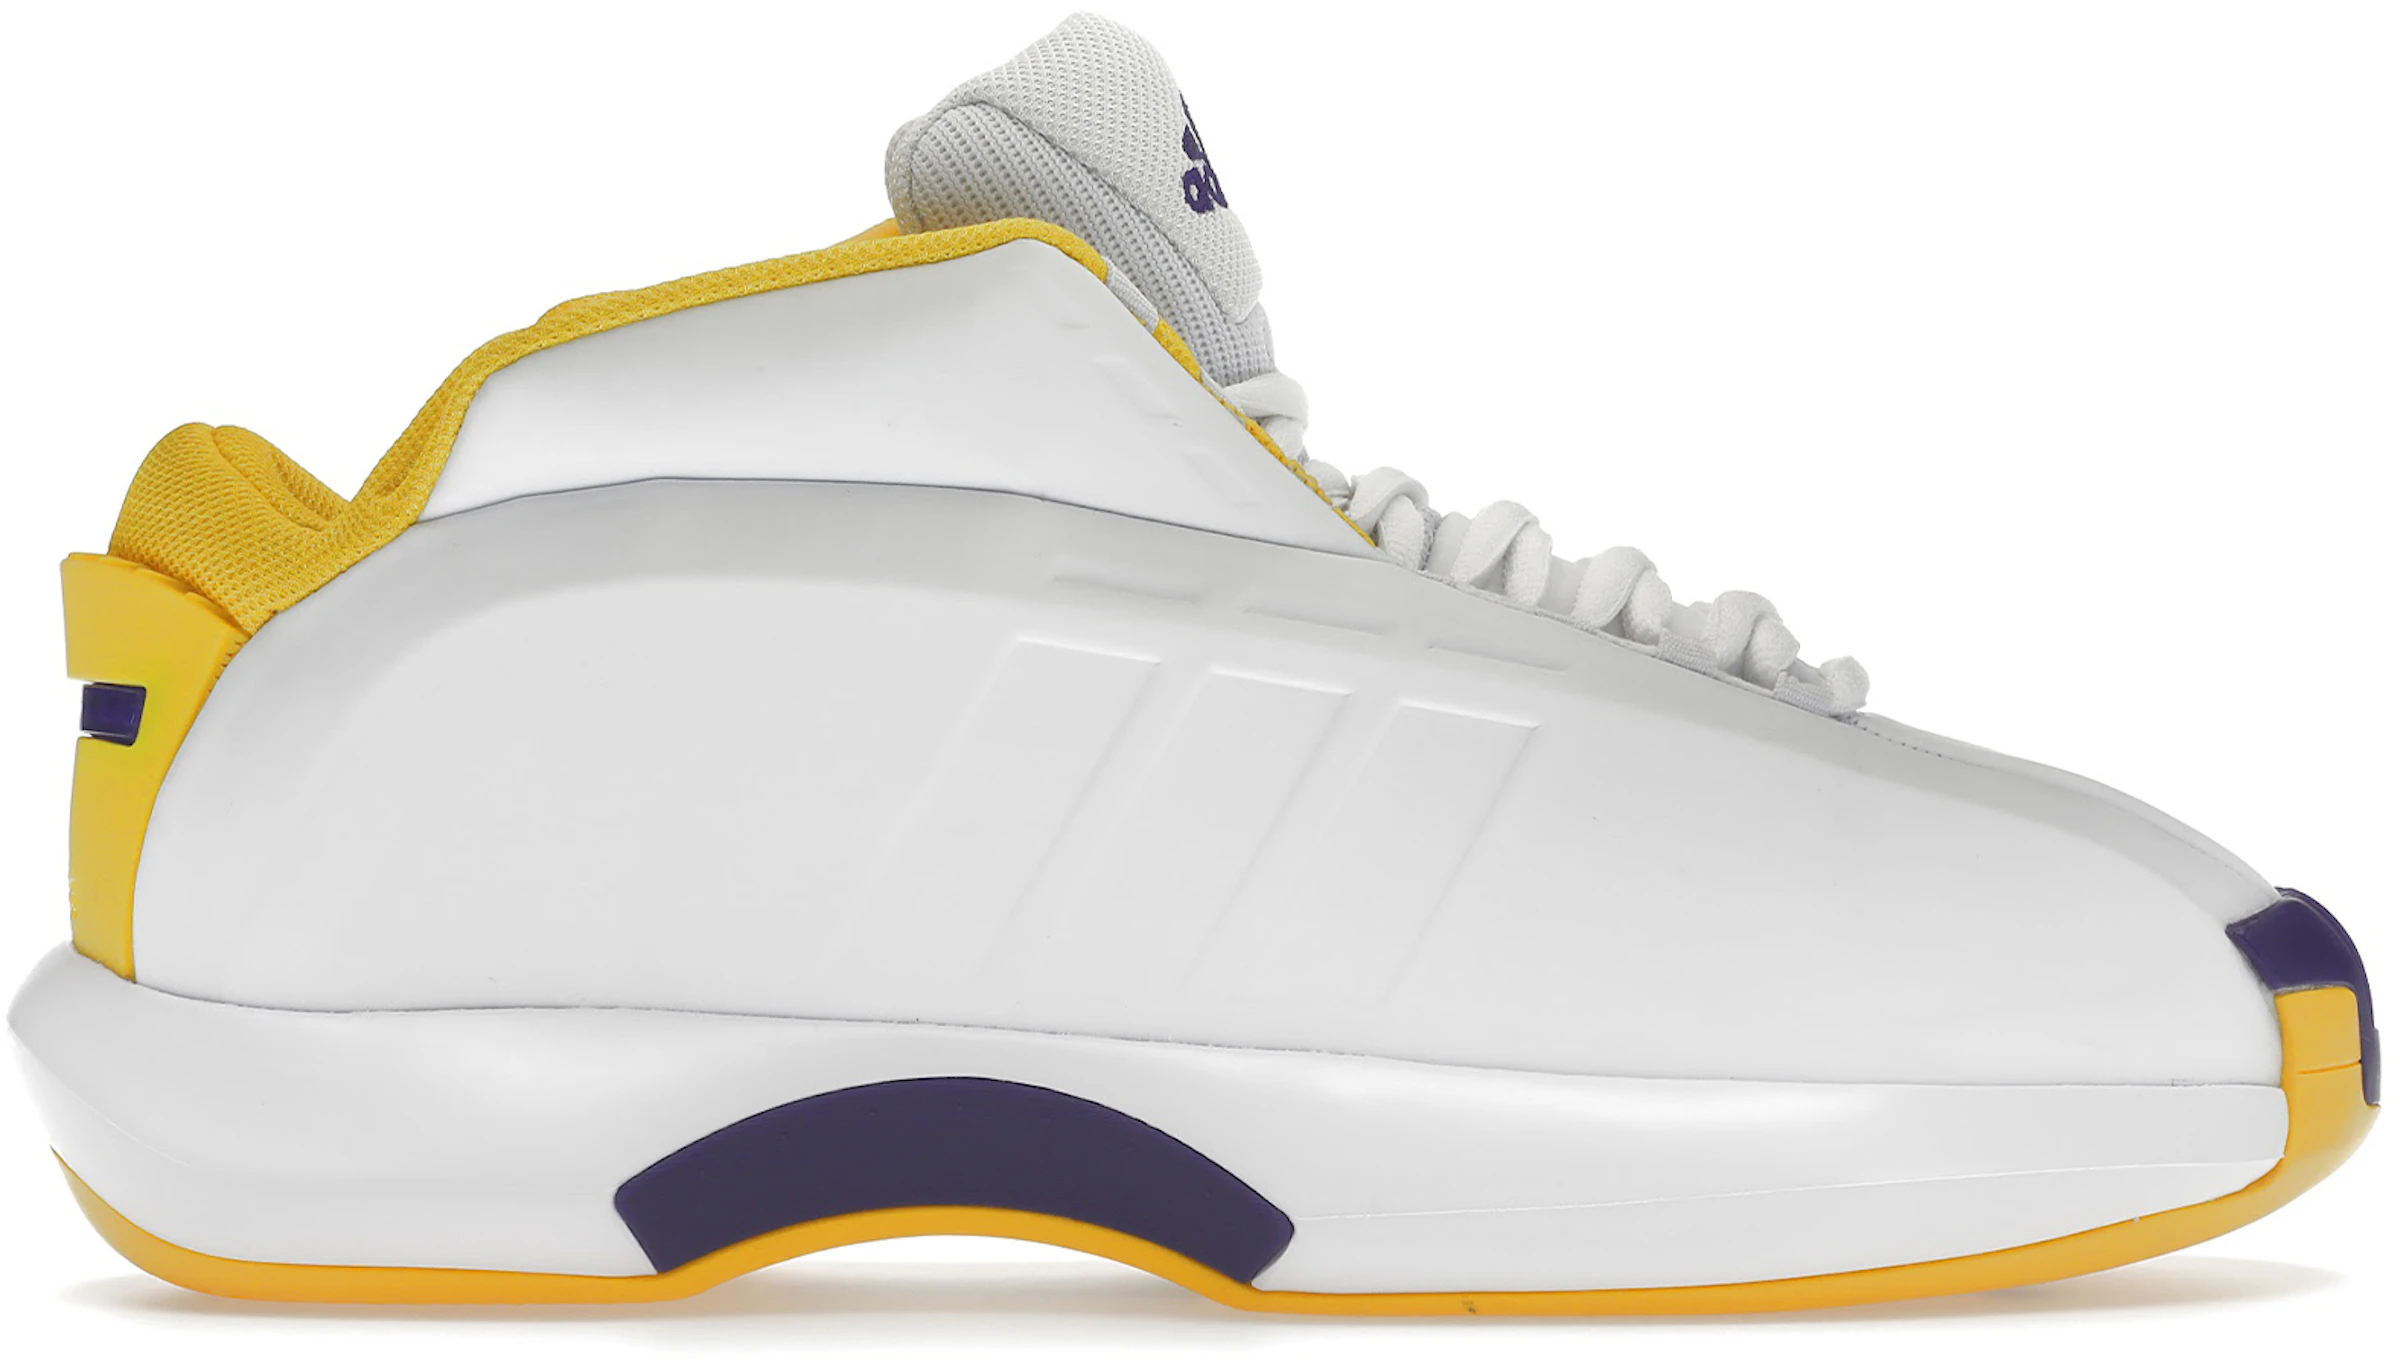 adidas Crazy Lakers Home (2022) - GY8947